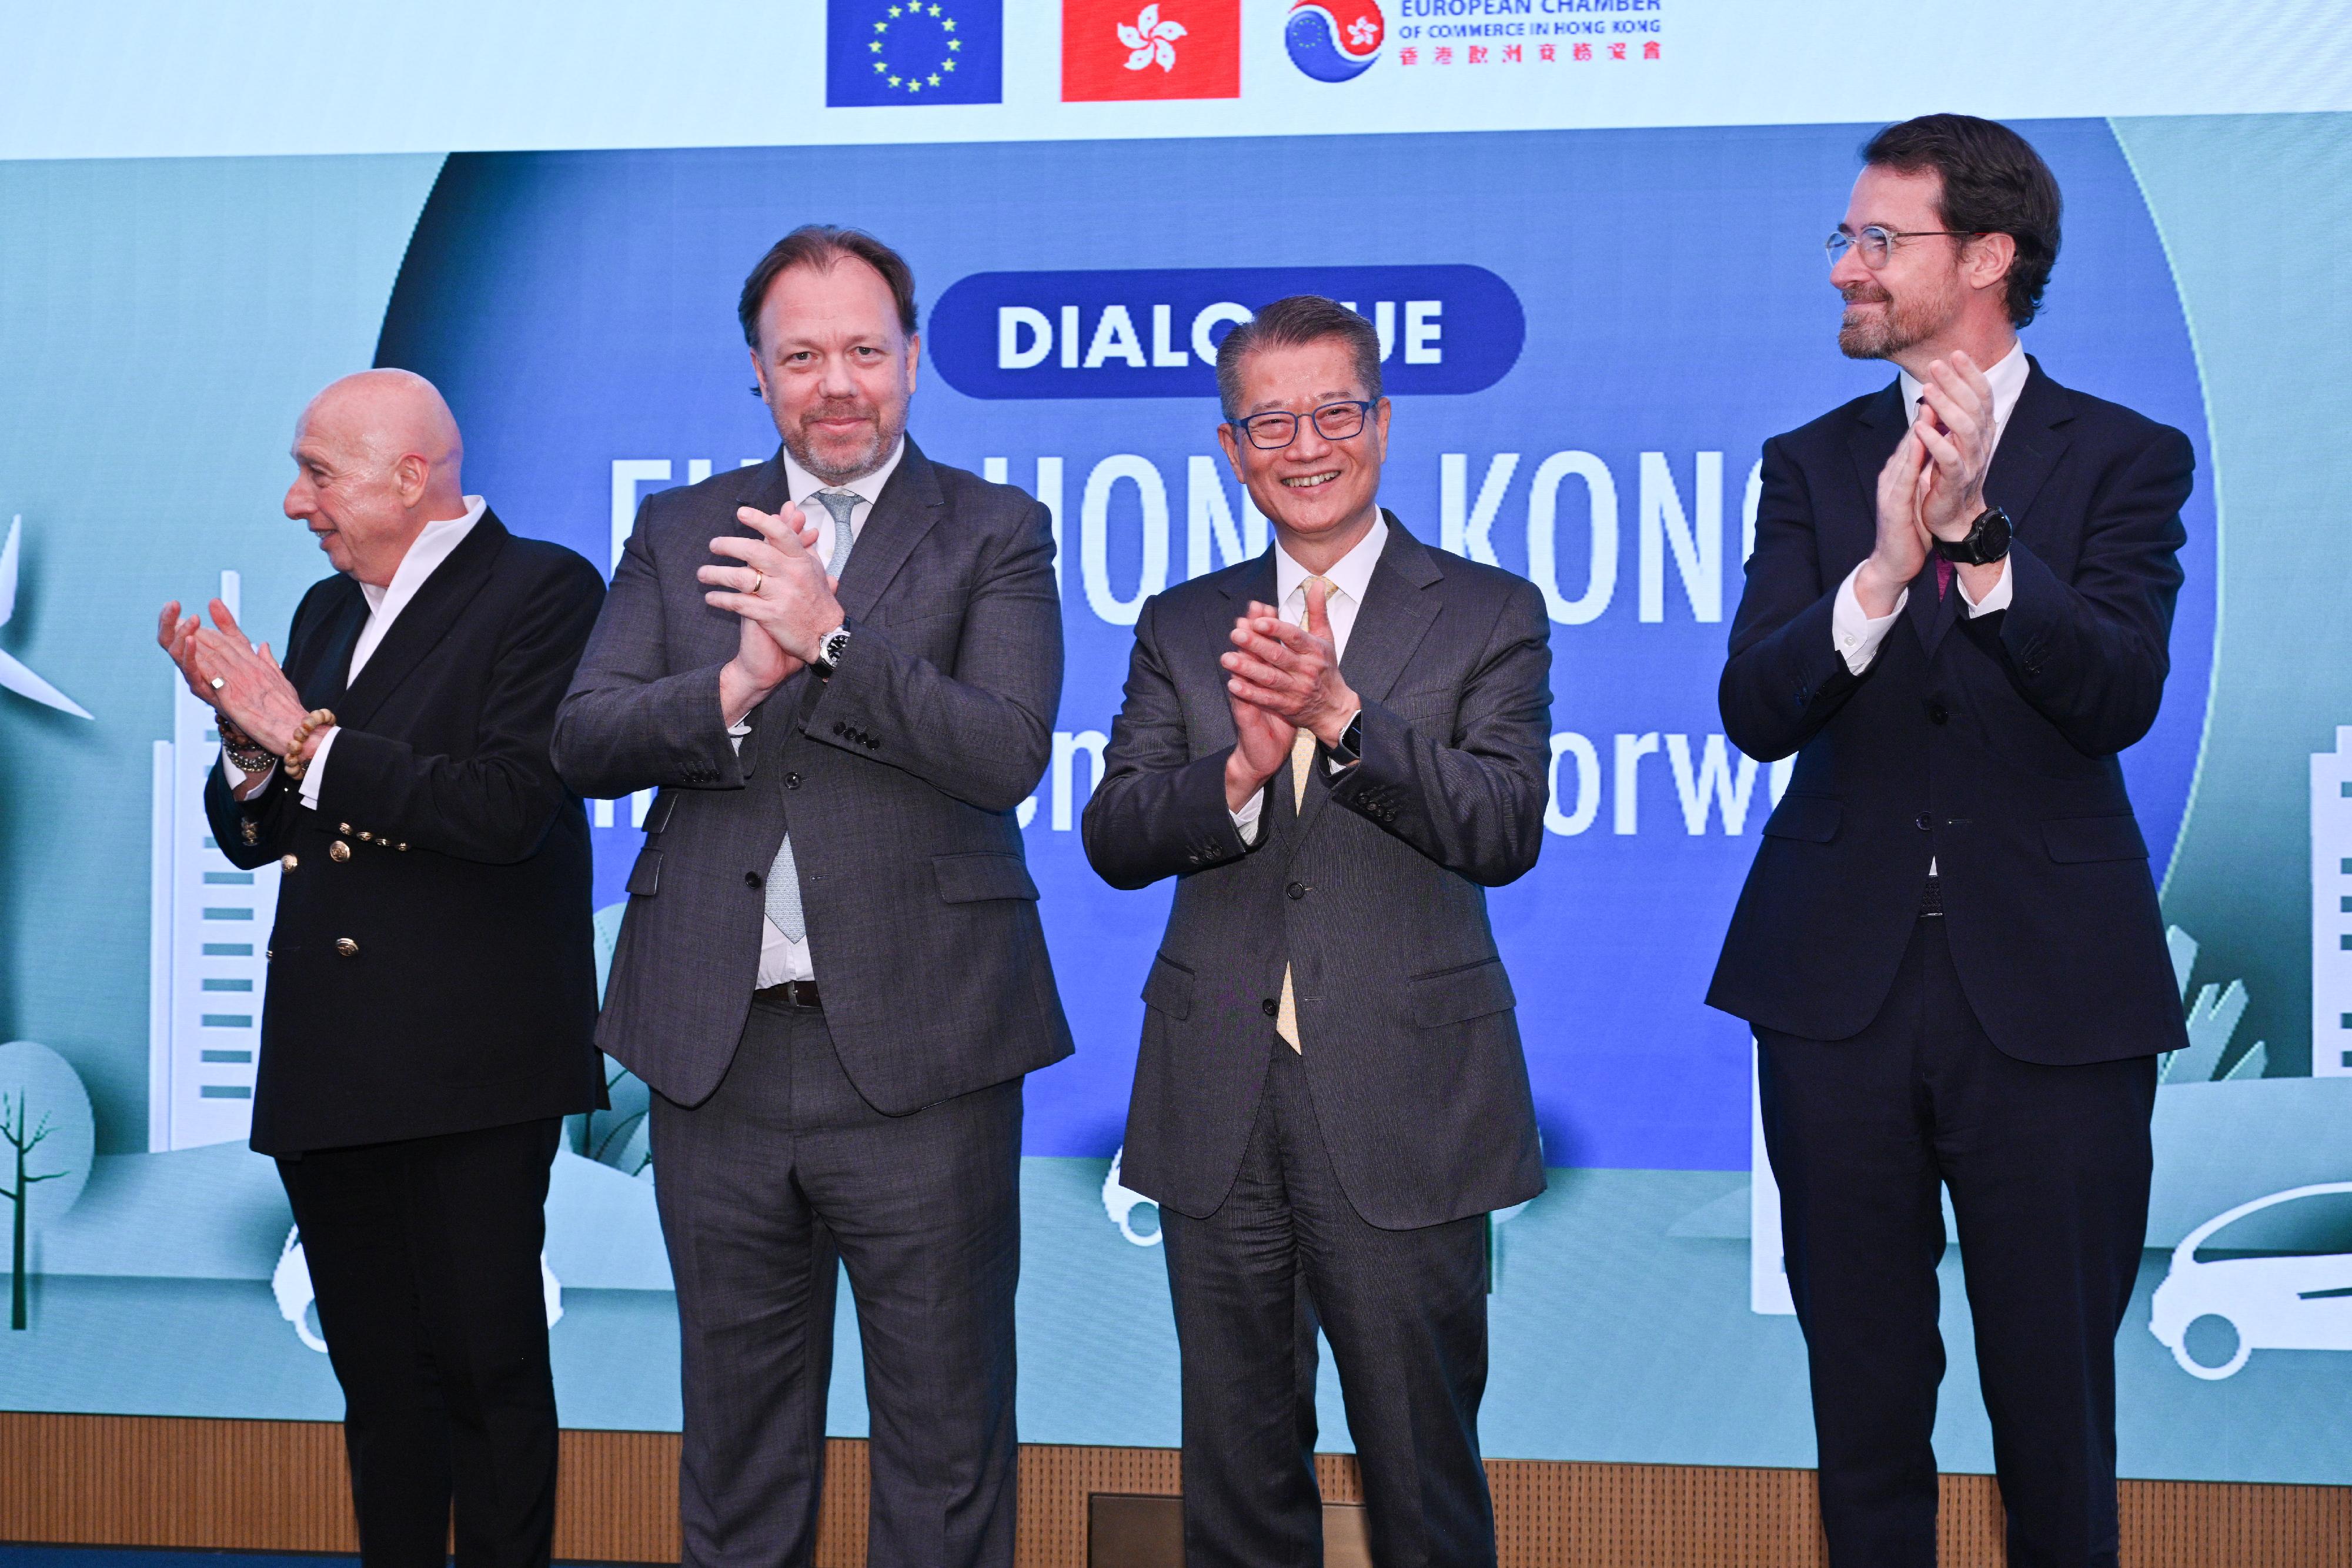 The Financial Secretary, Mr Paul Chan, attended the "EU and Hong Kong: The Green Way Forward" forum today (March 16). Photo shows Mr Chan (second right); the Head of the European Union Office to Hong Kong and Macao, Mr Thomas Gnocchi (second left); the Chair of the Euorpean Chamber of Commerce, Mr Inaki Amate (first right), and the Chairman of Lan Kwai Fong Group, Dr Allan Zeman, (first left) at the event.